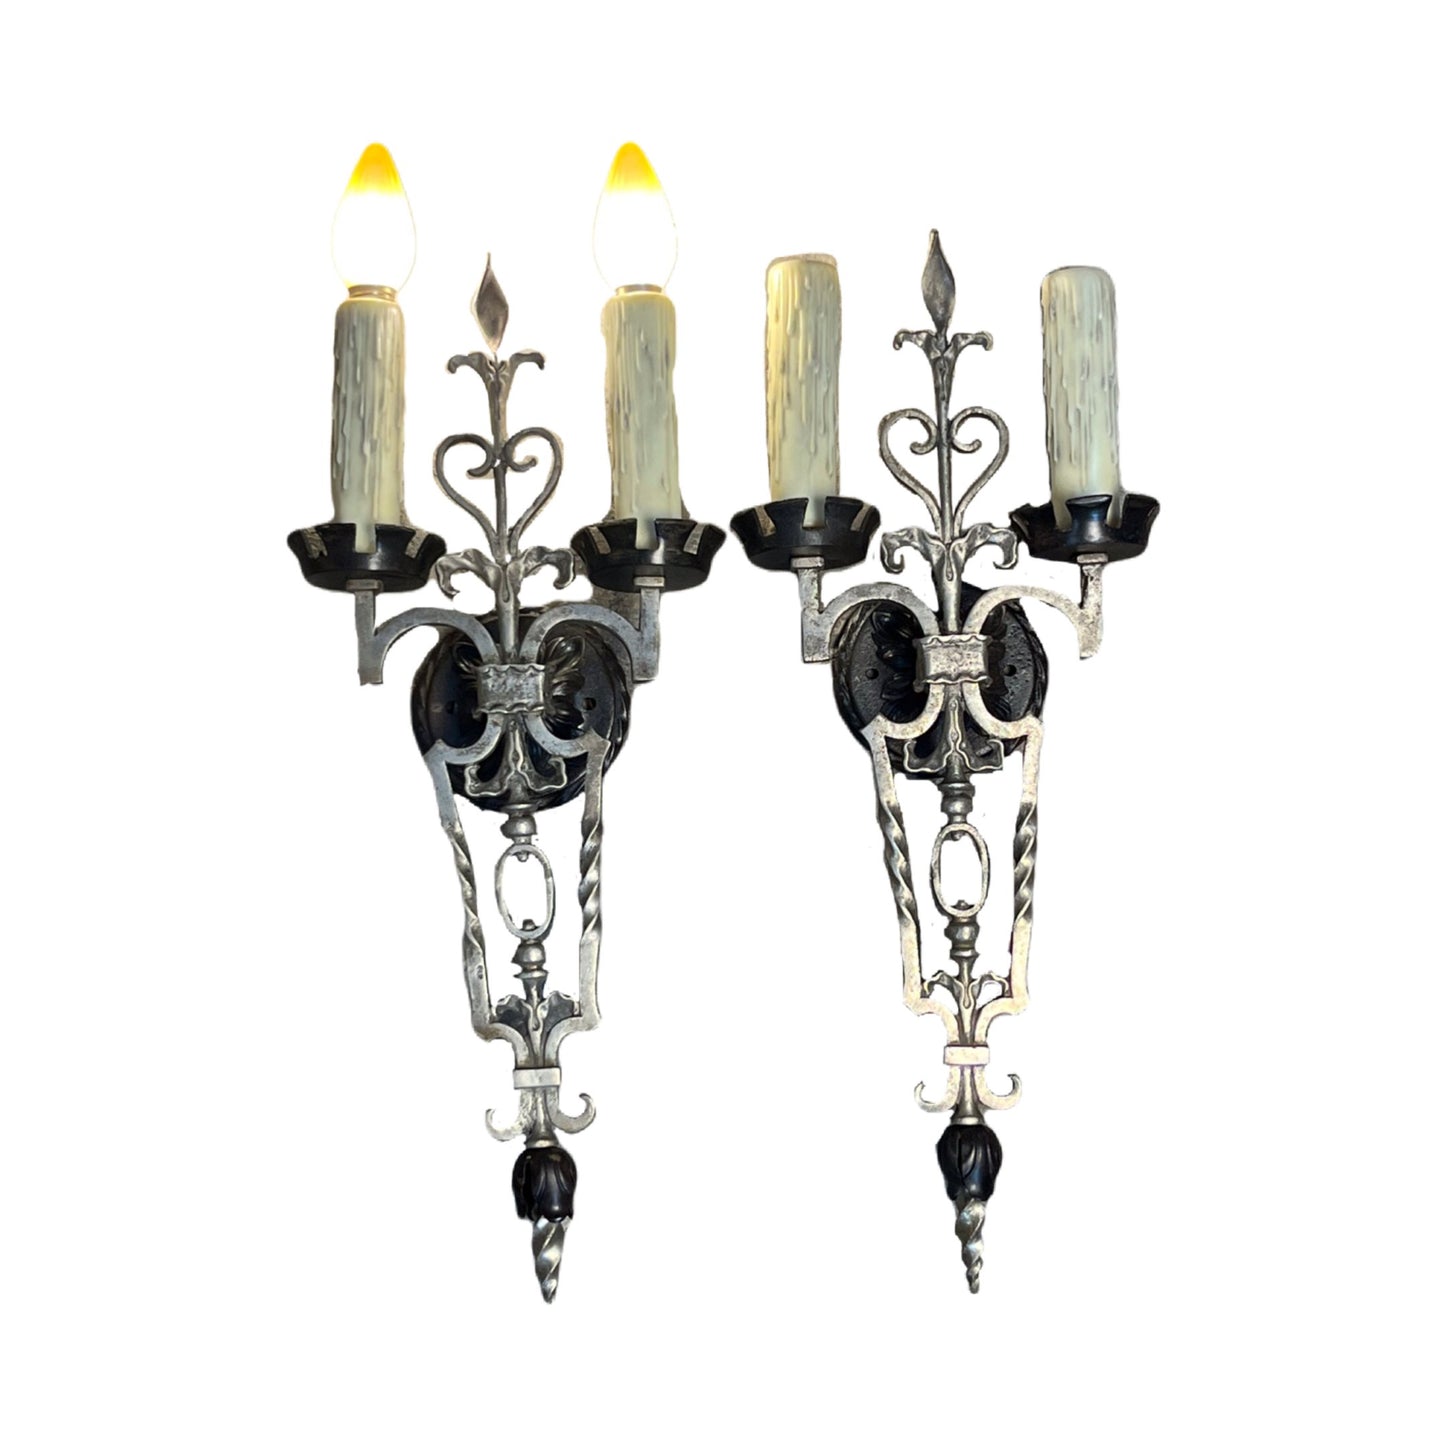 Nickeled Bronze Spanish Revival Wall Sconces